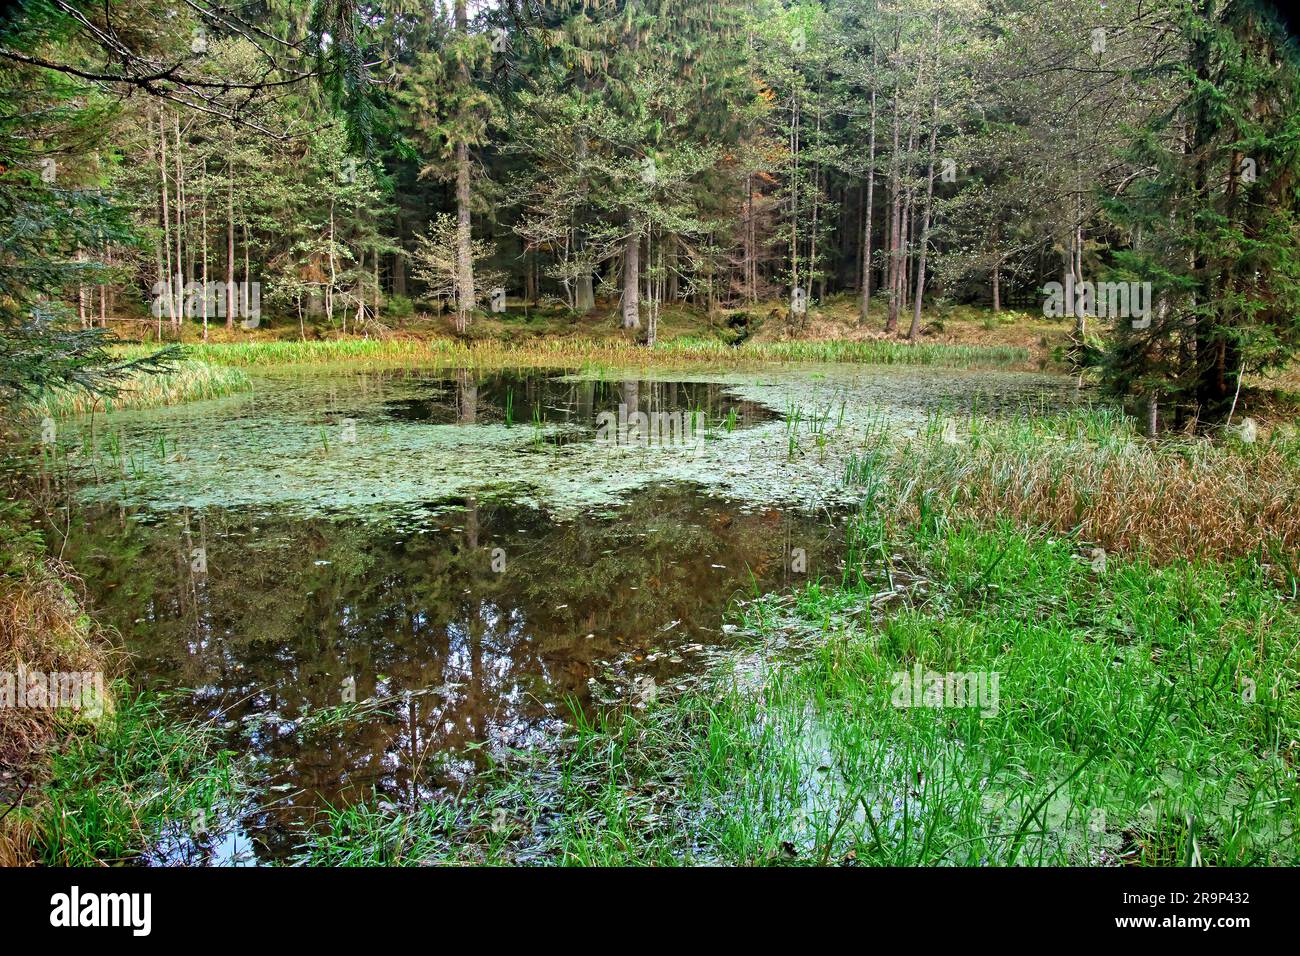 Pond, small lake, in the Bavarian Forest near Zwieselhaus. Bavaria, Germany Stock Photo